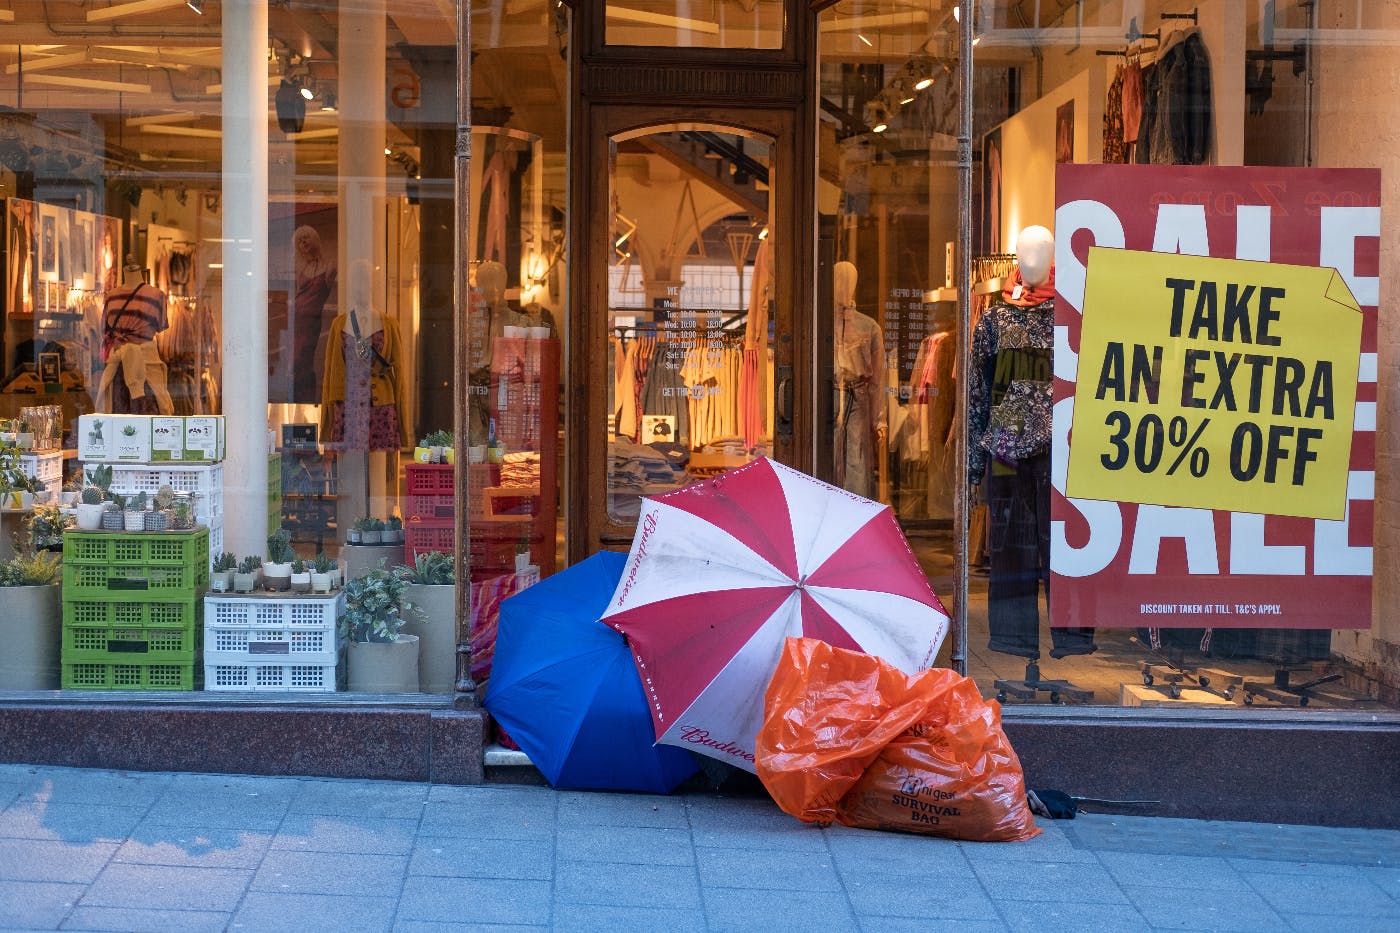 People camped out in front of a store advertising an extra 30% off